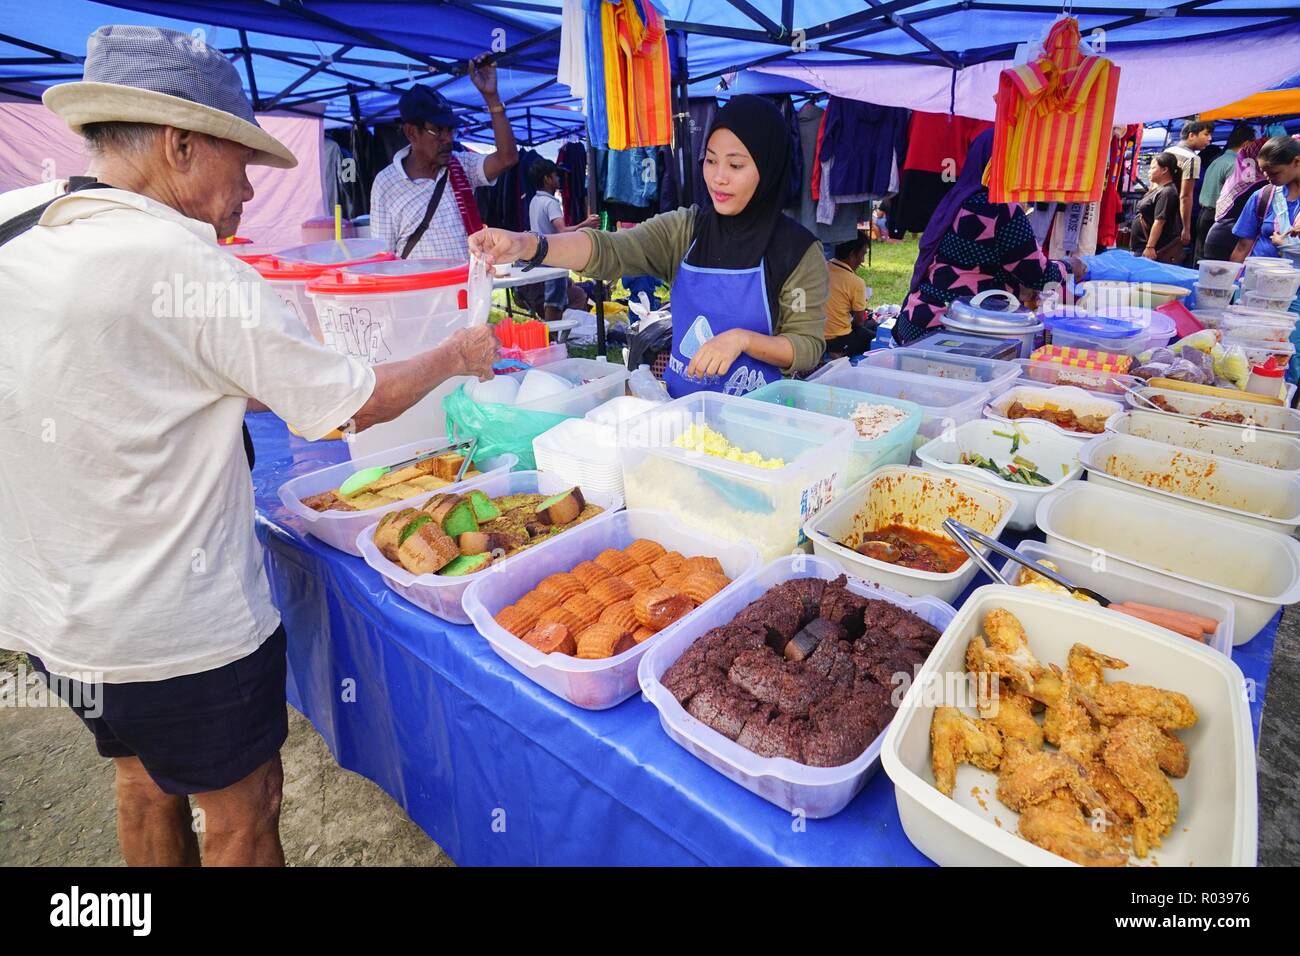 Tamparuli Sabah Malaysia - Aug 8, 2018 : Street food vendor selling cake at open market stall. Street eatery is popular among local and tourist. Stock Photo